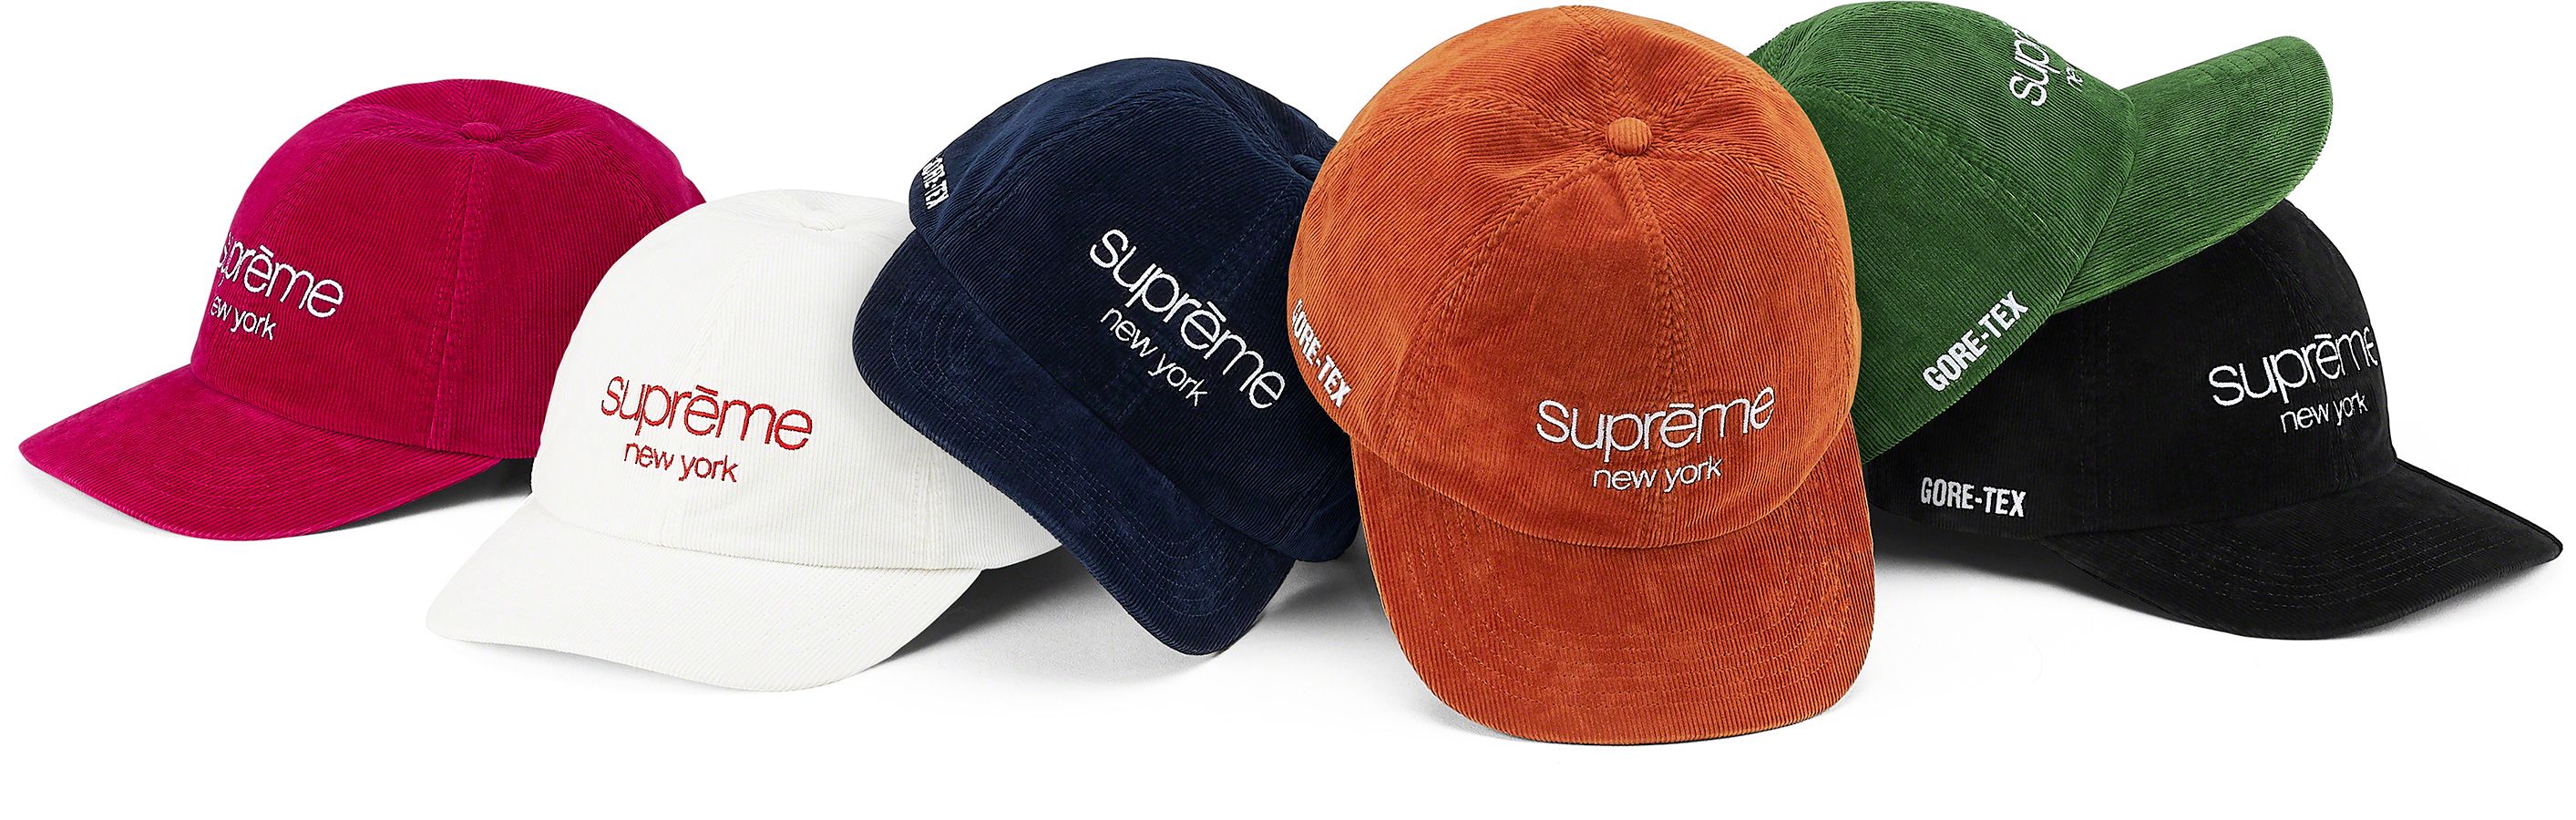 Lady Pink/Supreme Mesh Back 5-Panel - Fall/Winter 2021 Preview 